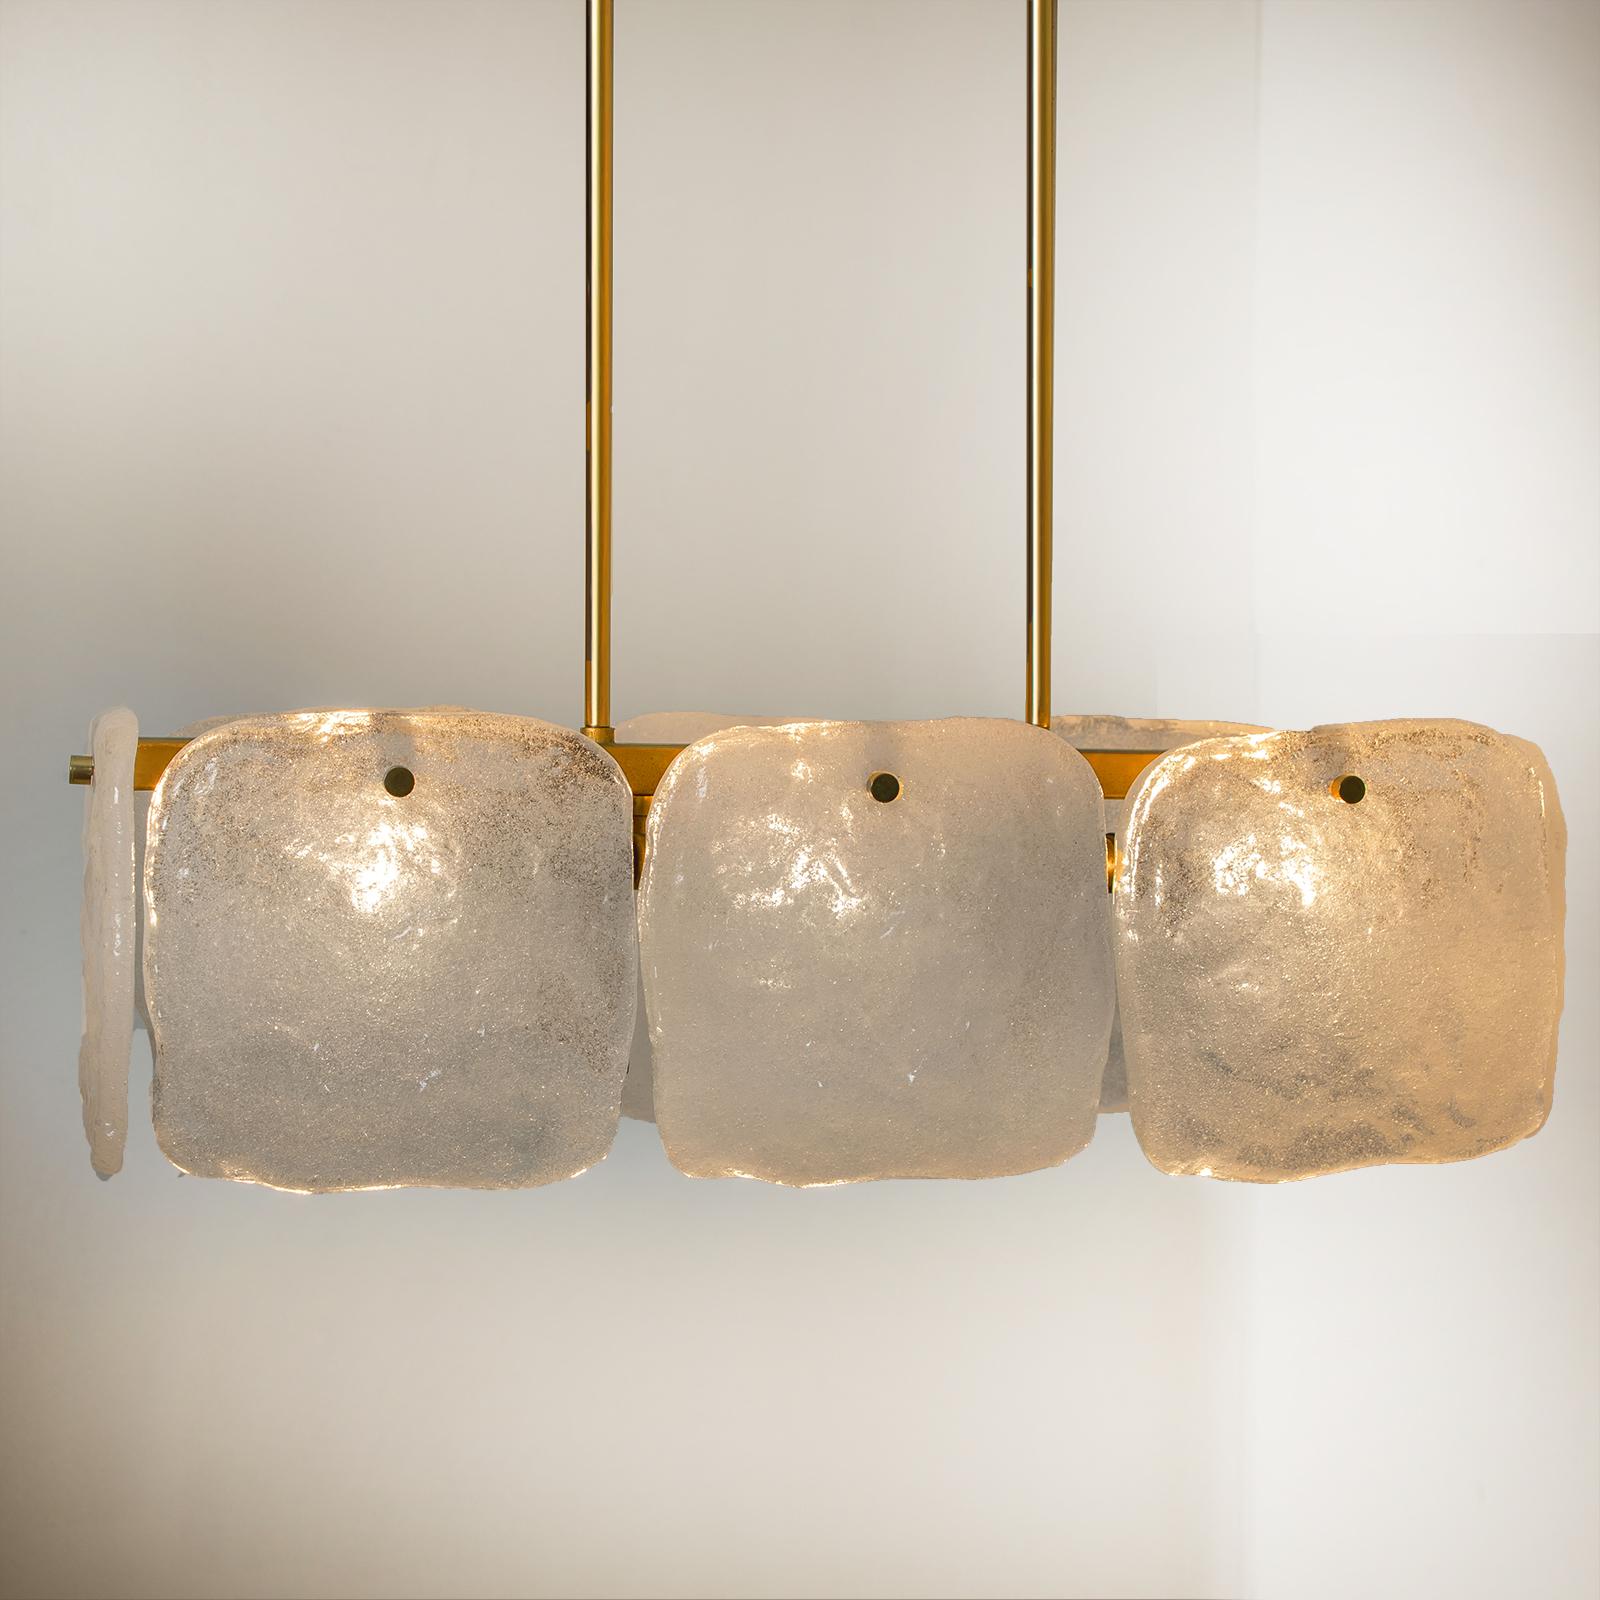 An ice glass pendant lights designed by J.T Kalmar, manufactured by Kalmar Franken, Austria in the 1960s.
High-end and handmade design from the 20th century. The pendant/chandelier has eight large squares of white, opaque textured glass shades